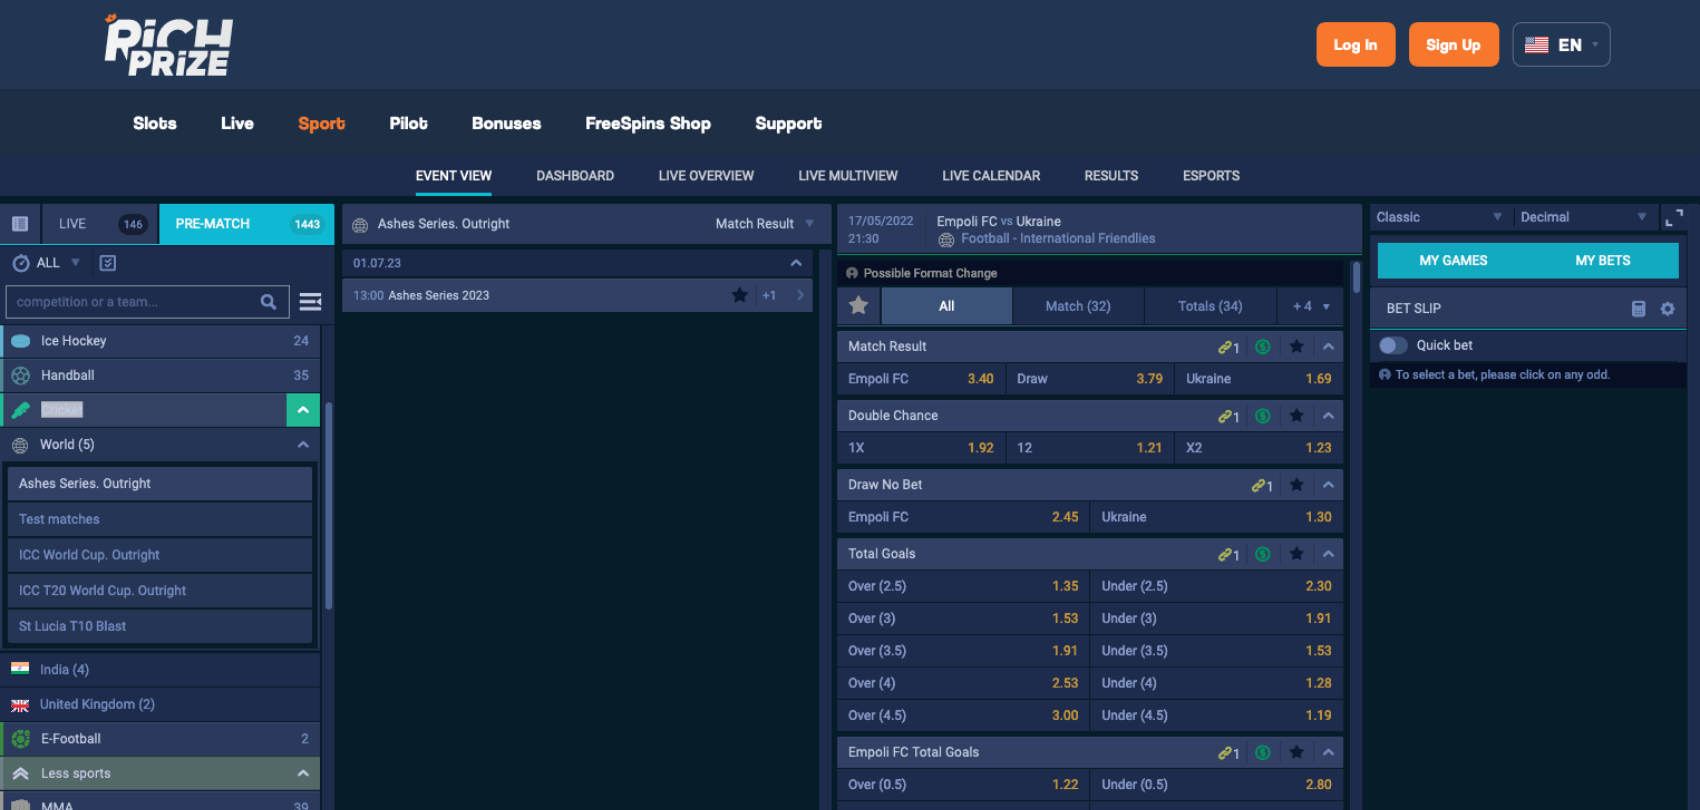 Richprize section with sports betting